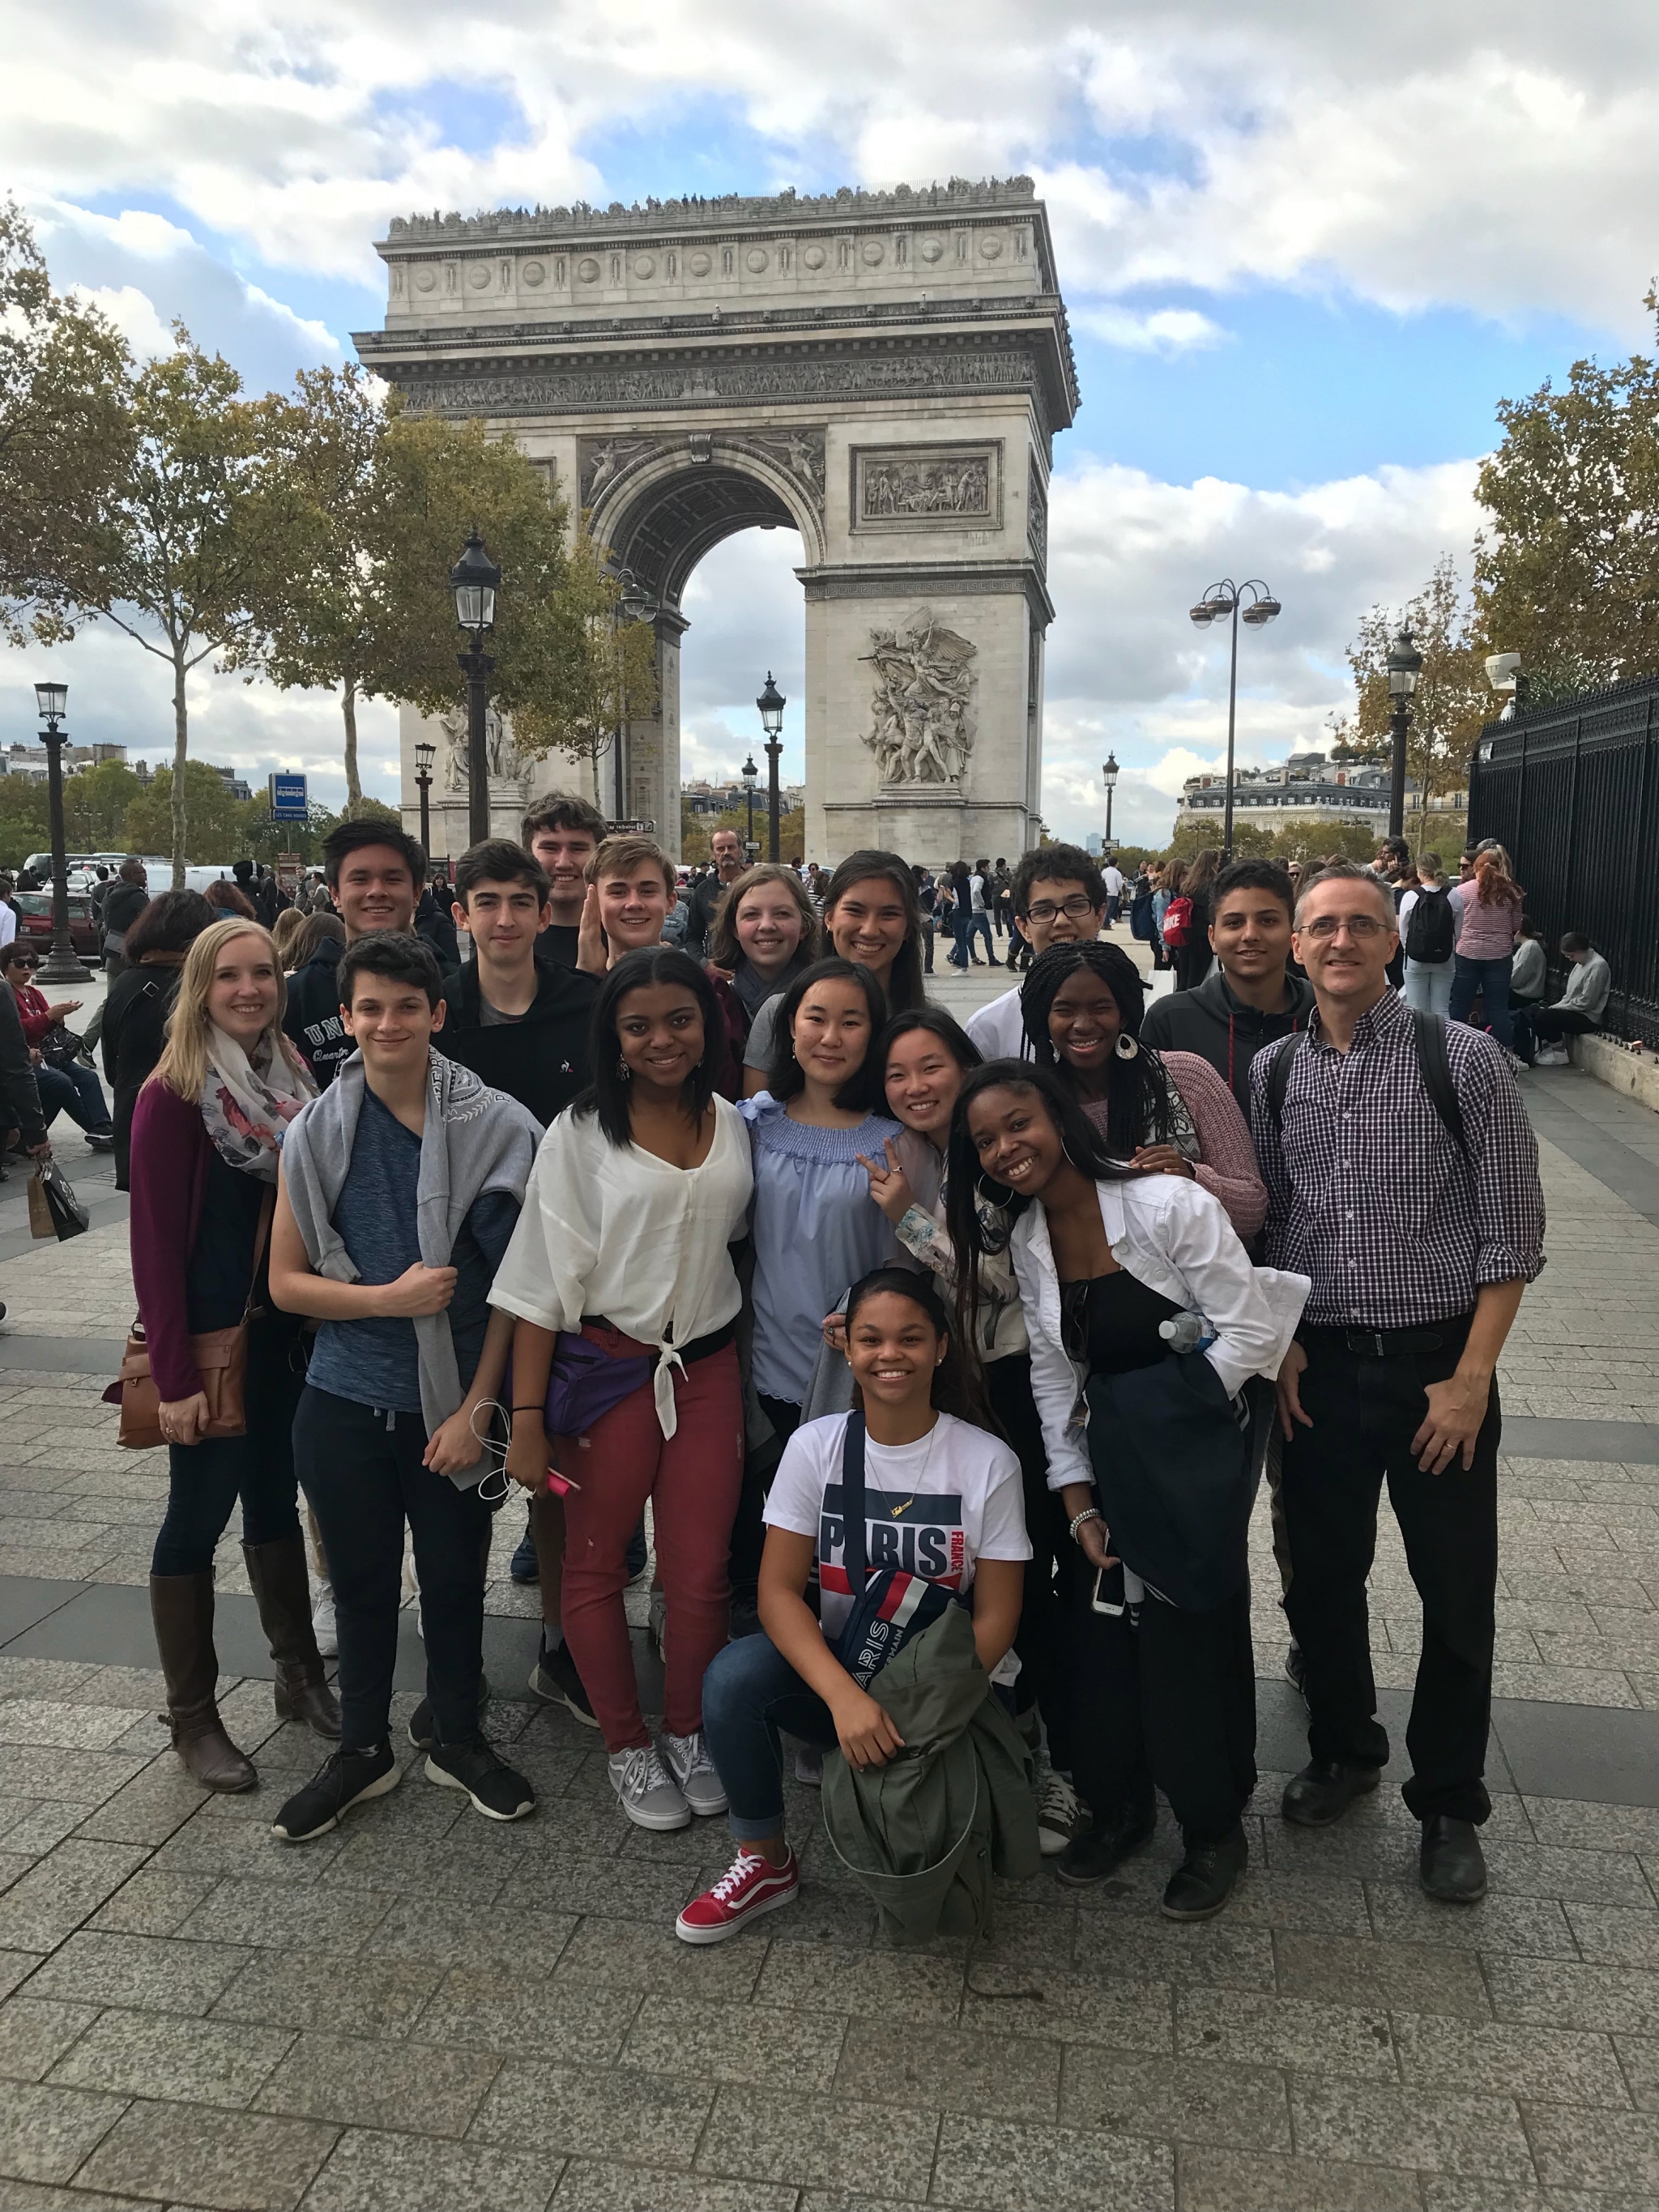 France Fall Project Week Trip at the Arc de Triomphe Silicon Valley, Greece or MIT could be in your child’s future. Find out about Fall Project Week at The Altamont School- Open House on April 14.